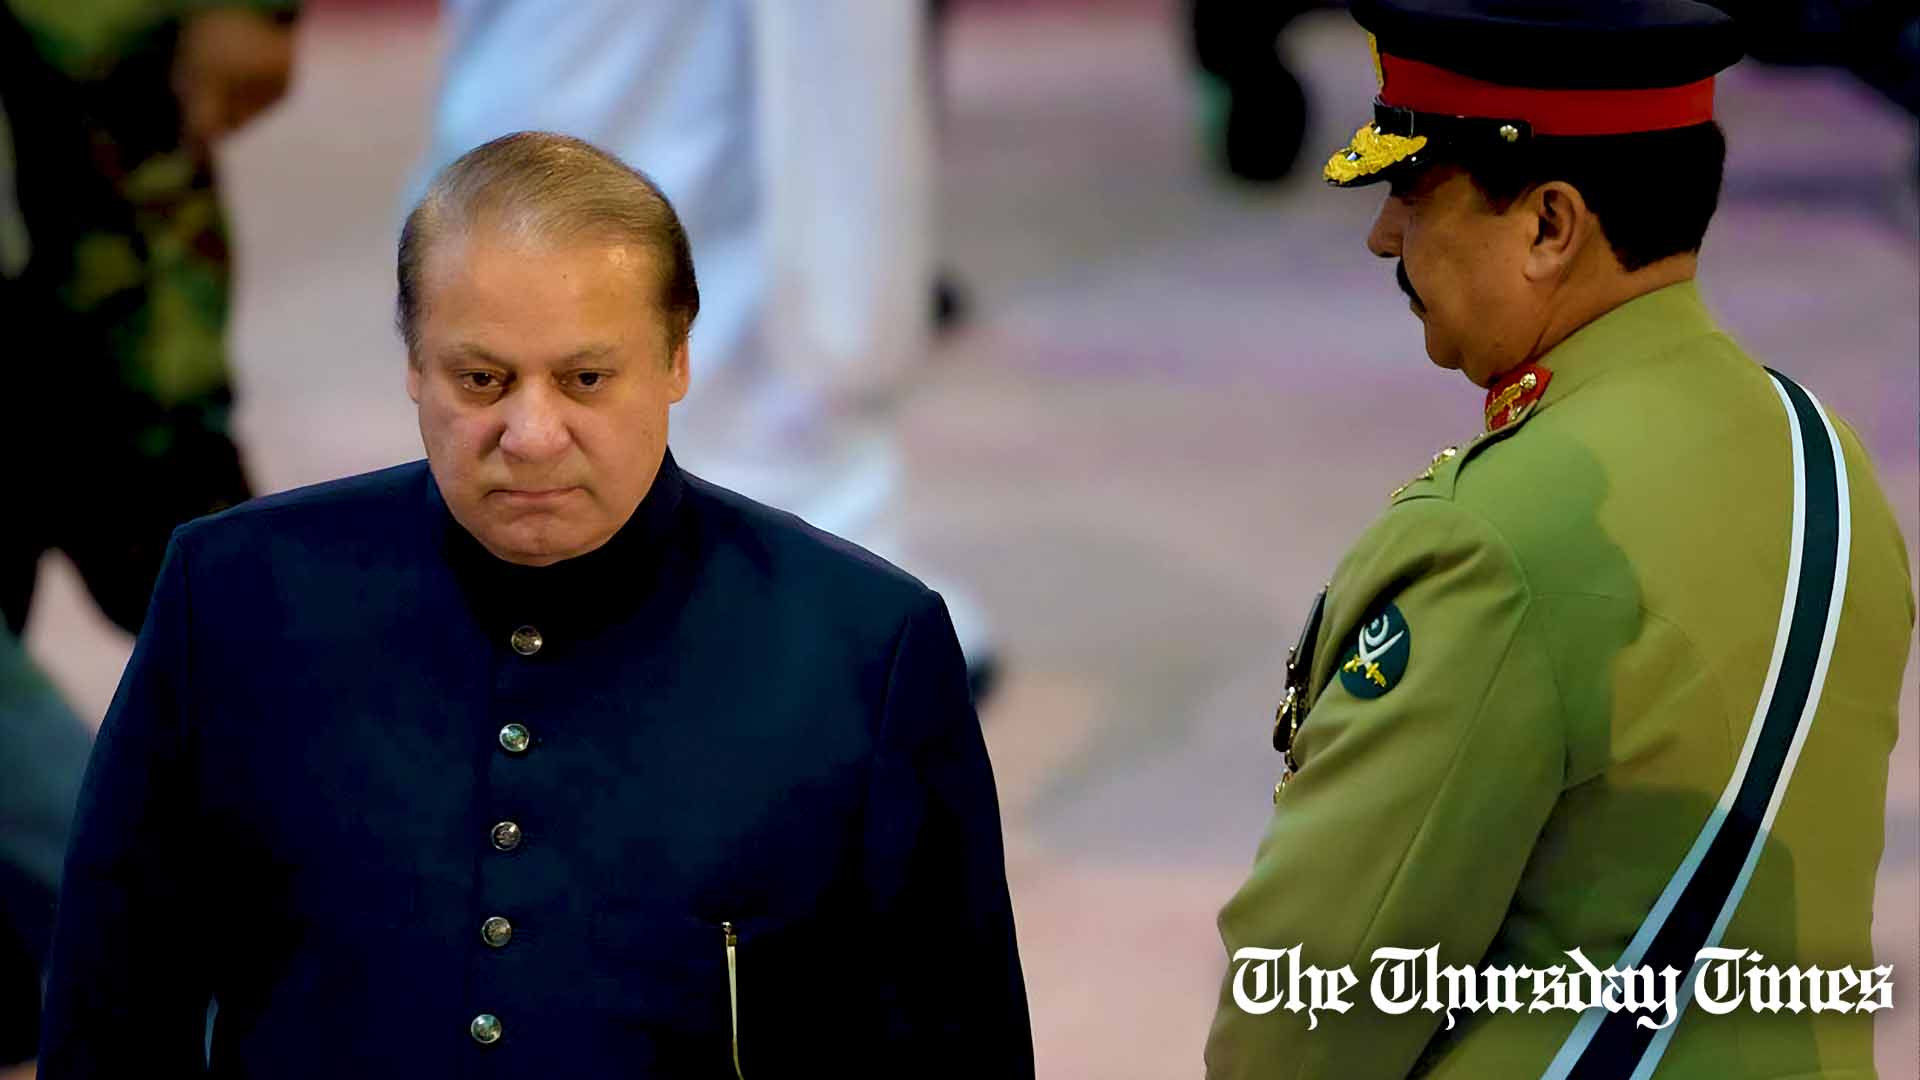 A file photo is shown of former prime minister Nawaz Sharif (L) walking past former COAS General Raheel Sharif (R) at Islamabad on August 14, 2015. — AFP